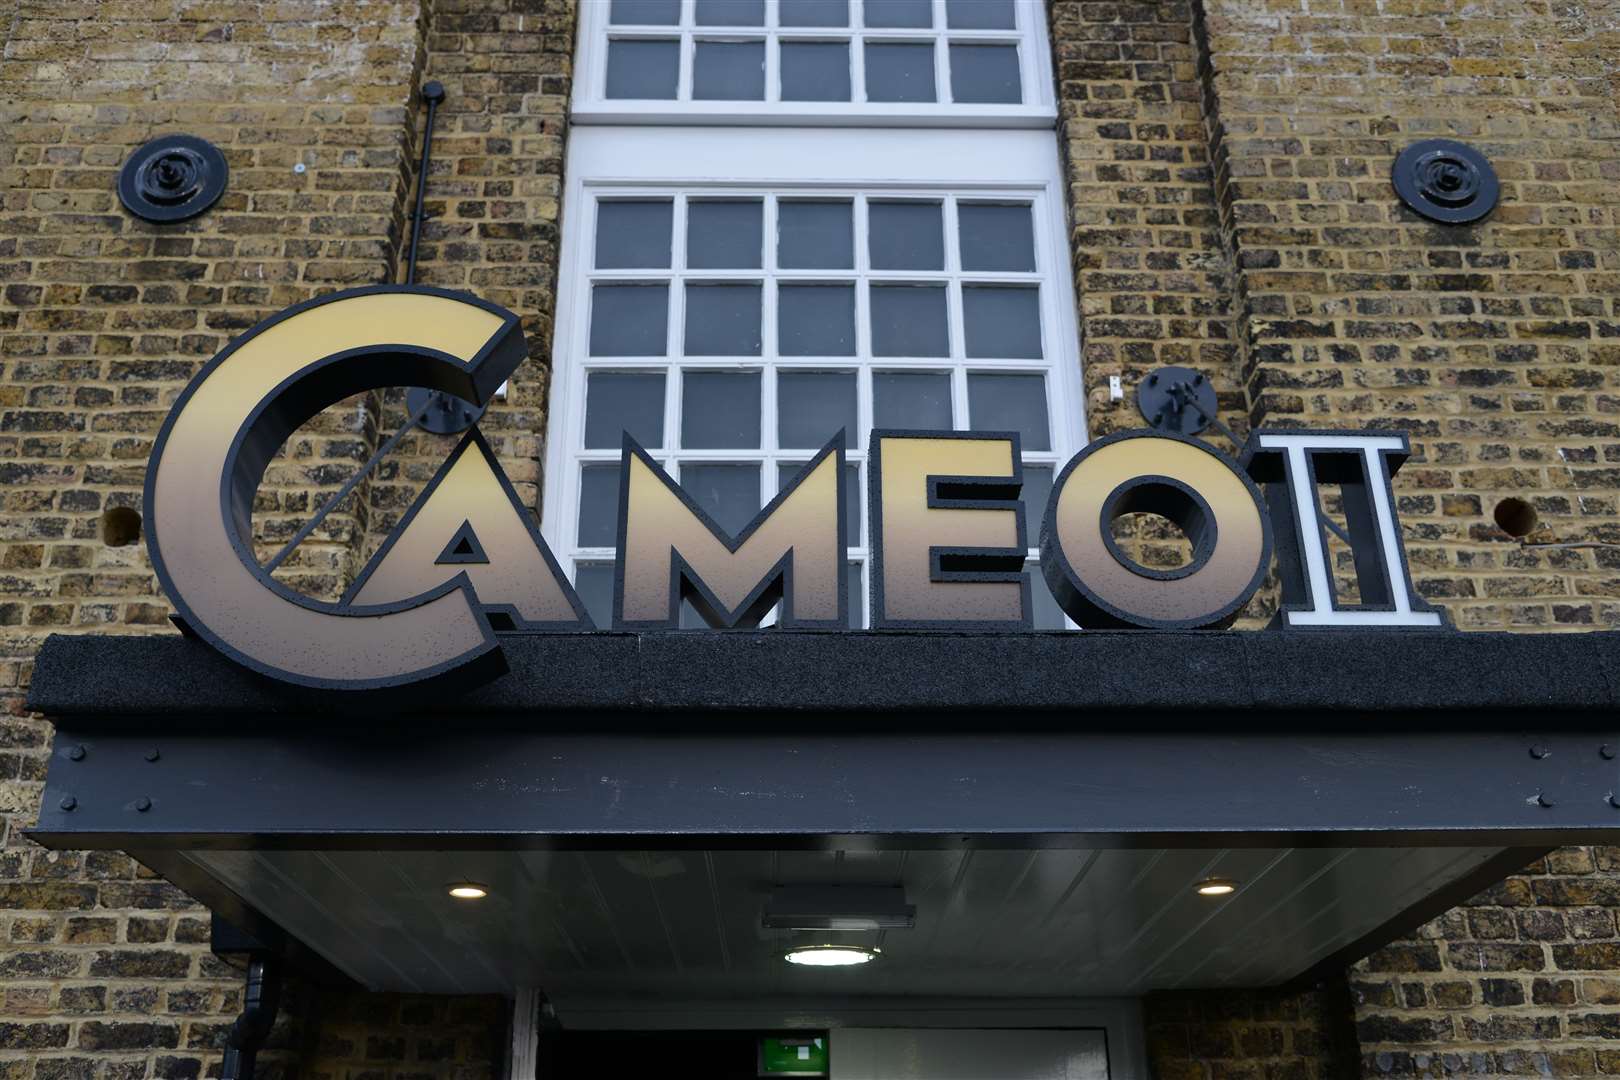 The alleged attack happened in Cameo nightclub in Ashford